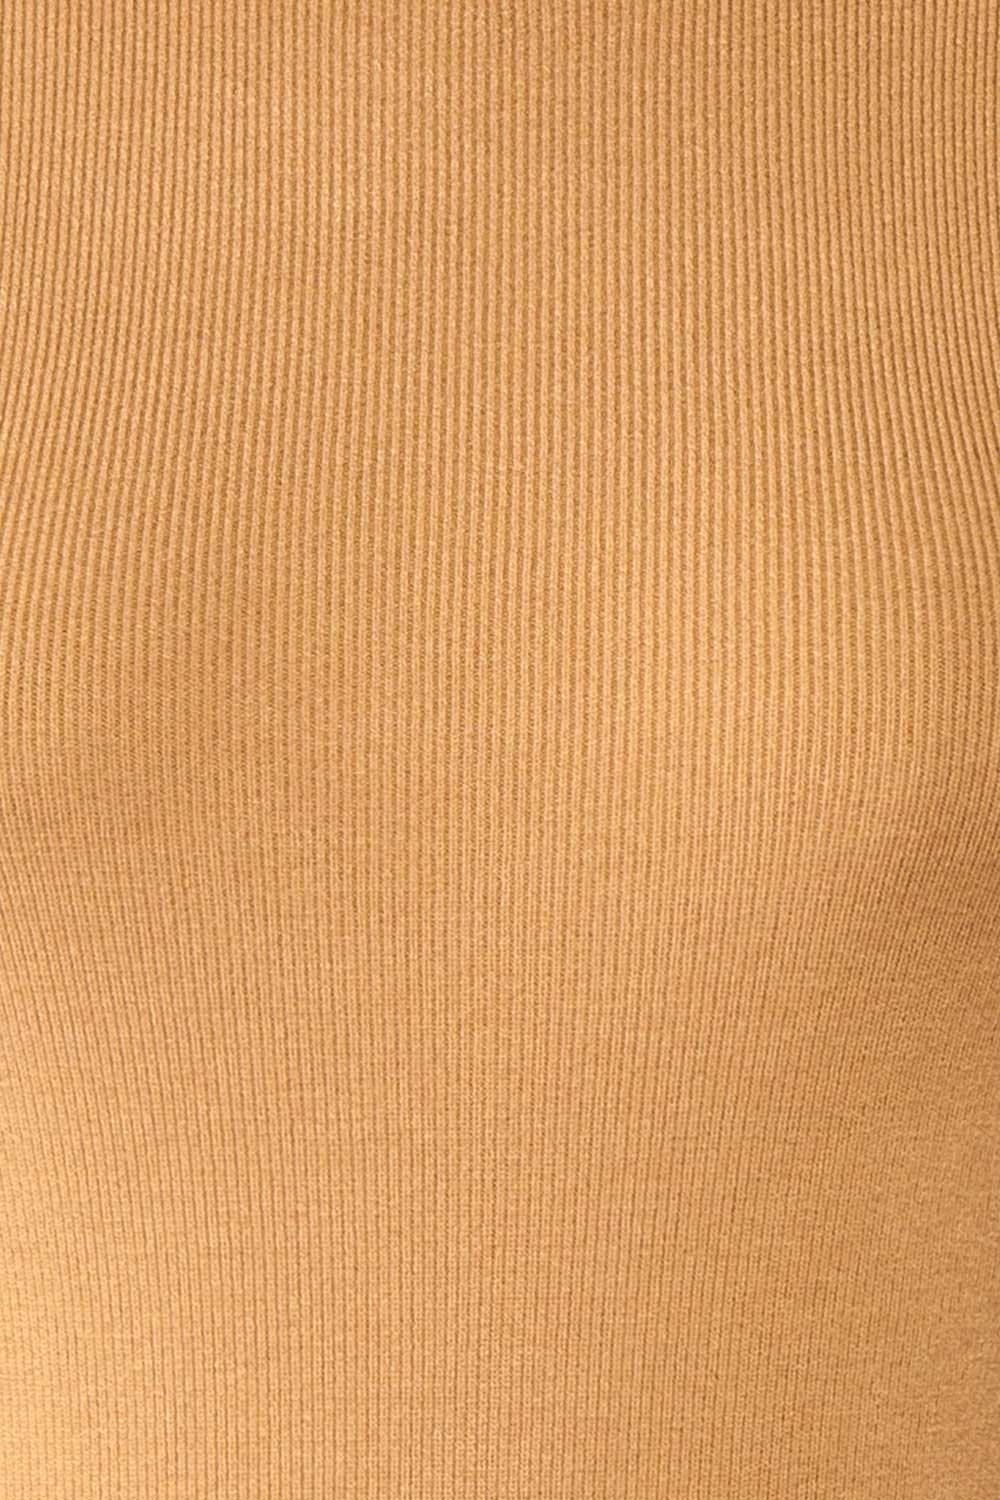 Nalleli Beige Fitted Mock Top w/ Half Sleeves | Boutique 1861 fabric 